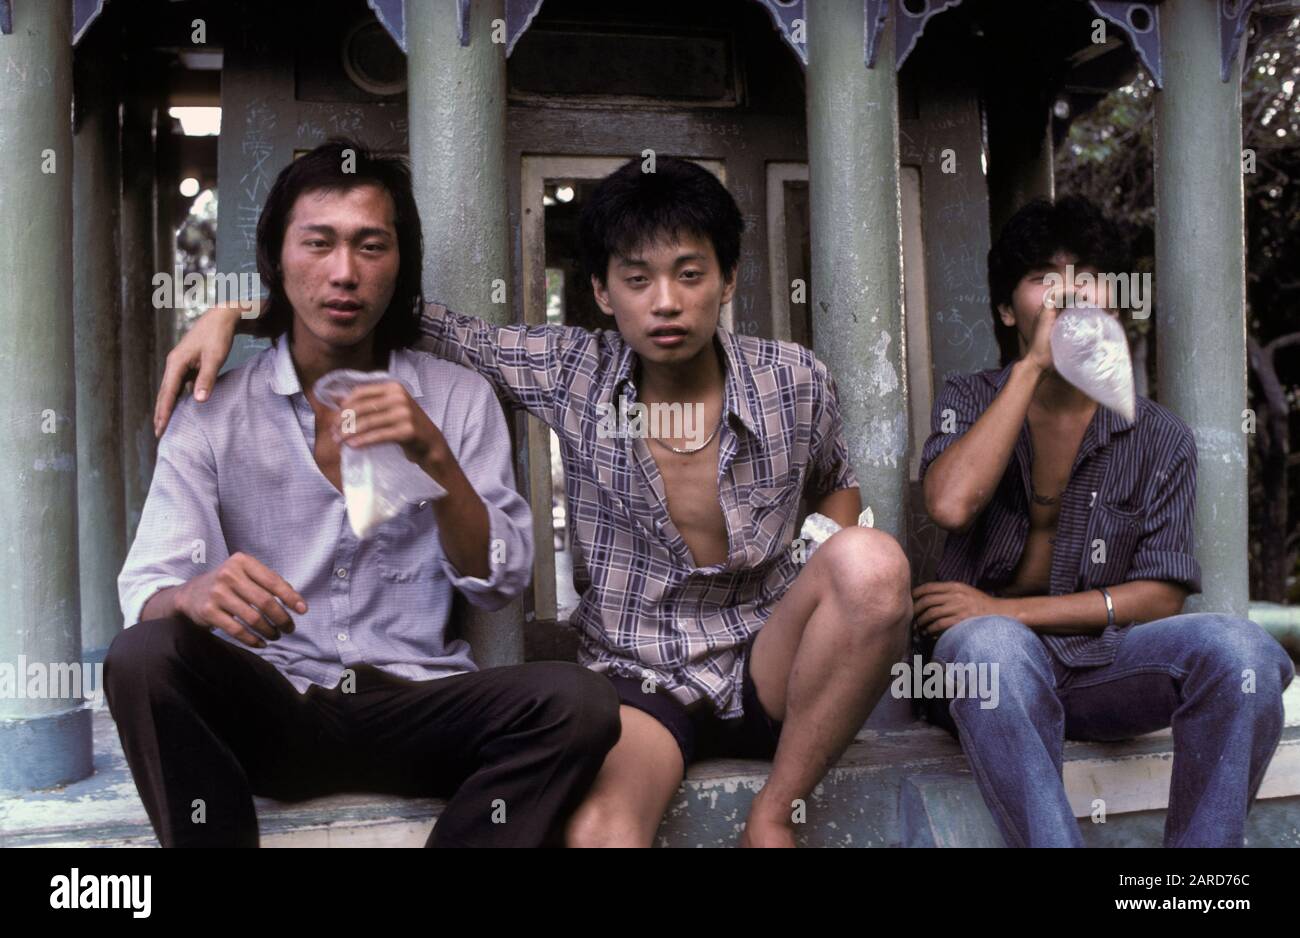 YOUNG MEN IN SINGAPORE GLUE SNIFFING. ALSO KNOWN AS BAGGING, GLADING, DUSTING OR HUFFING. Stock Photo